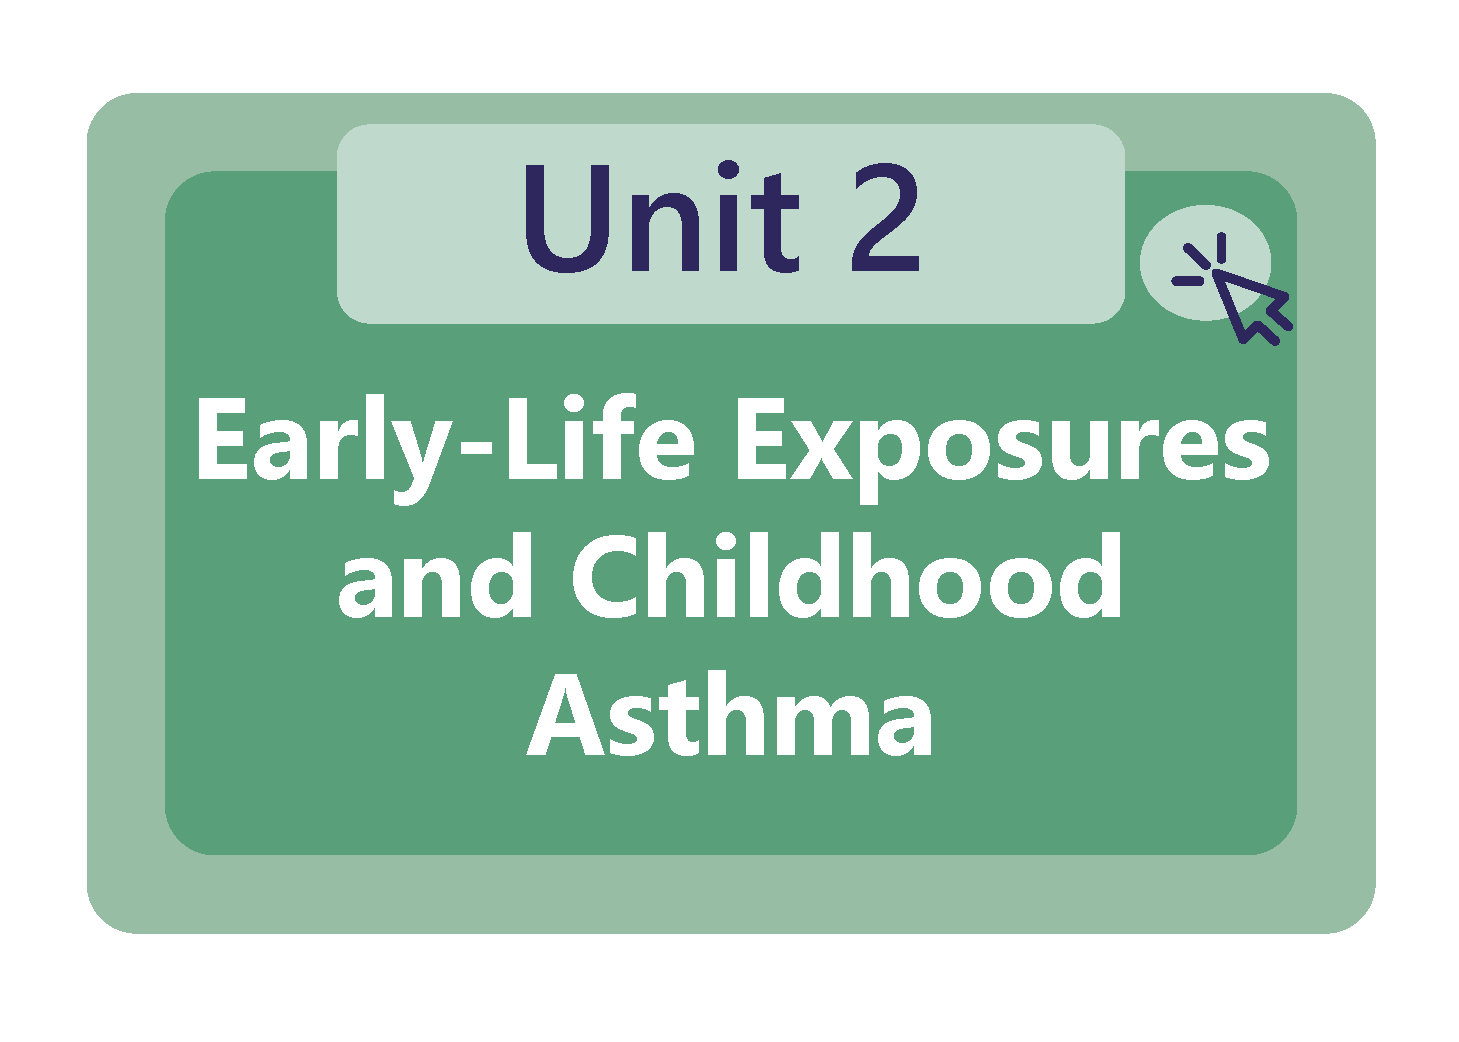 Early life exposures and childhood asthma